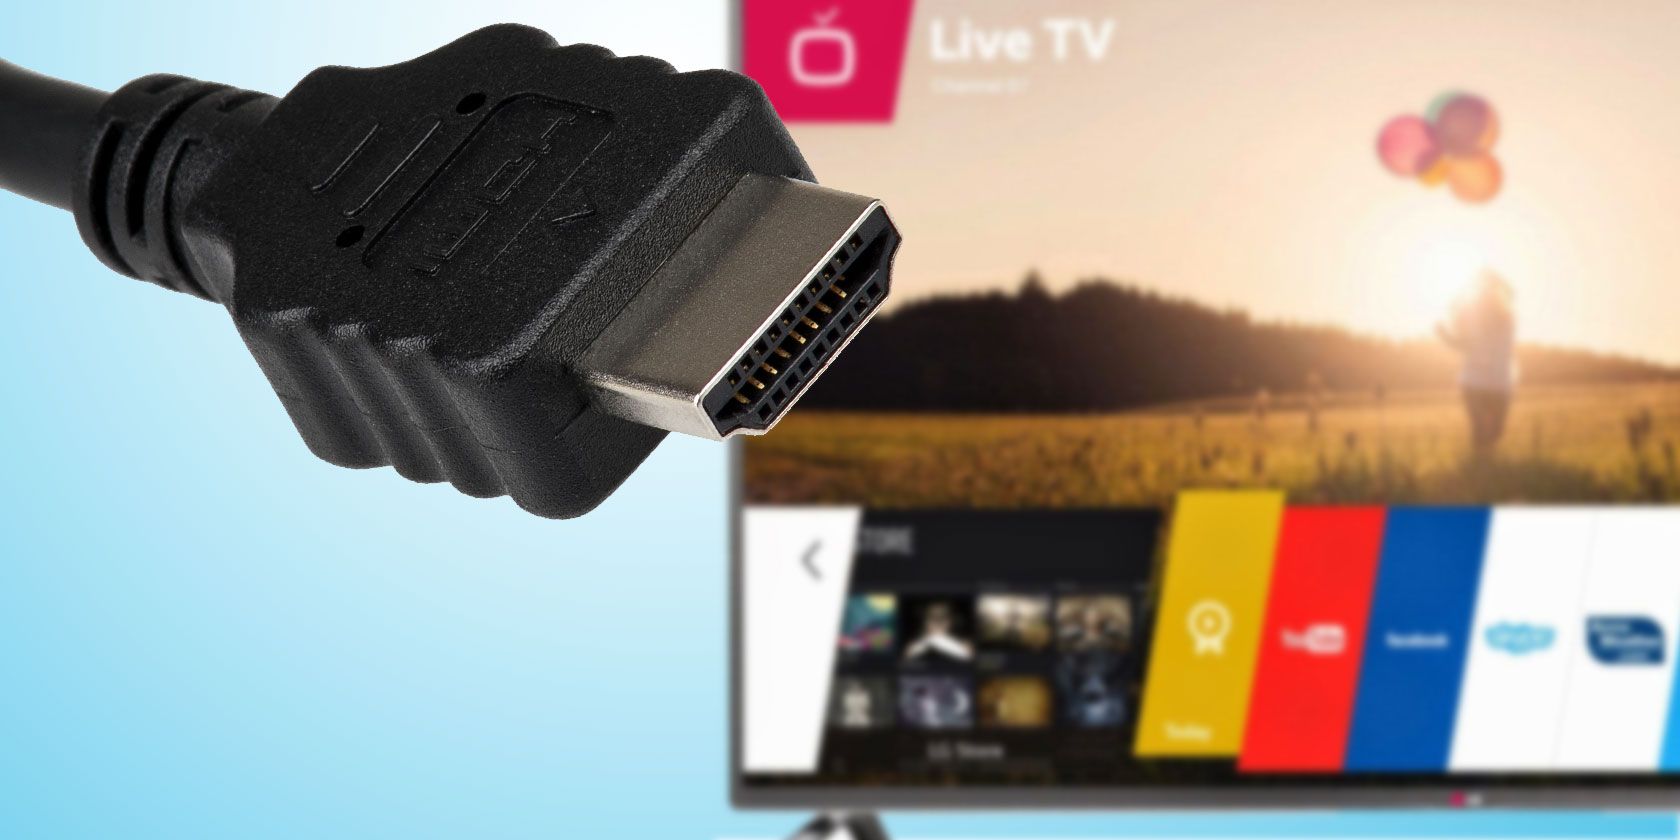 The Best HDMI Cable for LG and Samsung TVs, Displays, and More